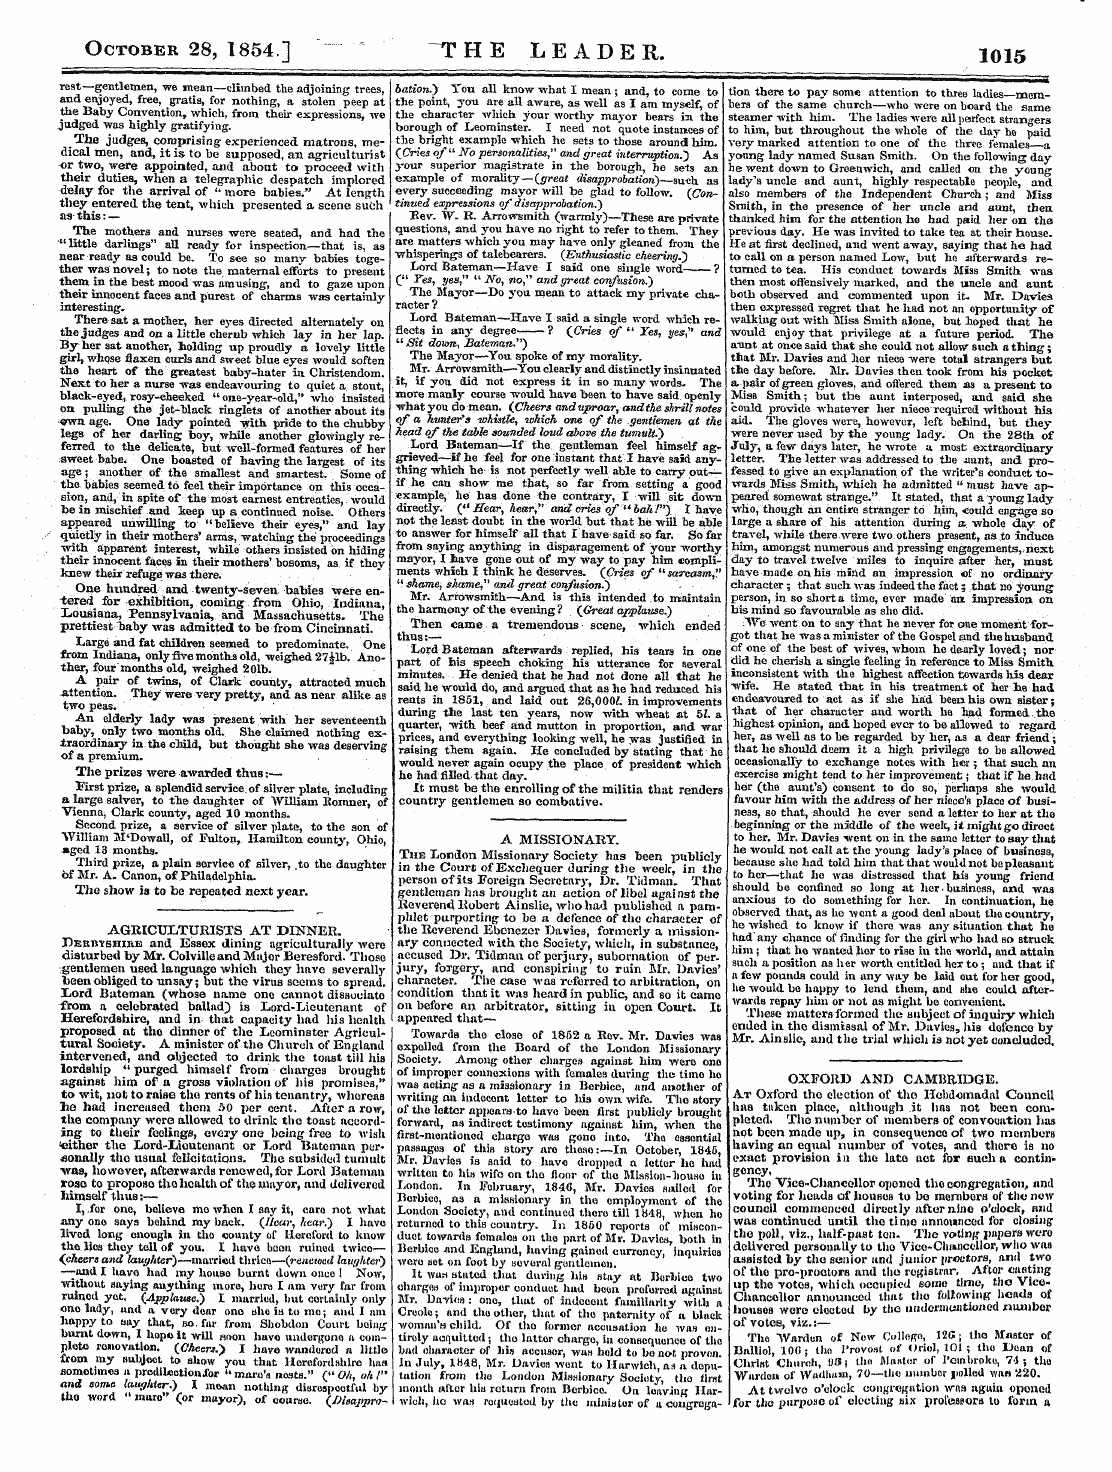 Leader (1850-1860): jS F Y, Country edition - October 28, 1854] The Leader. 1015